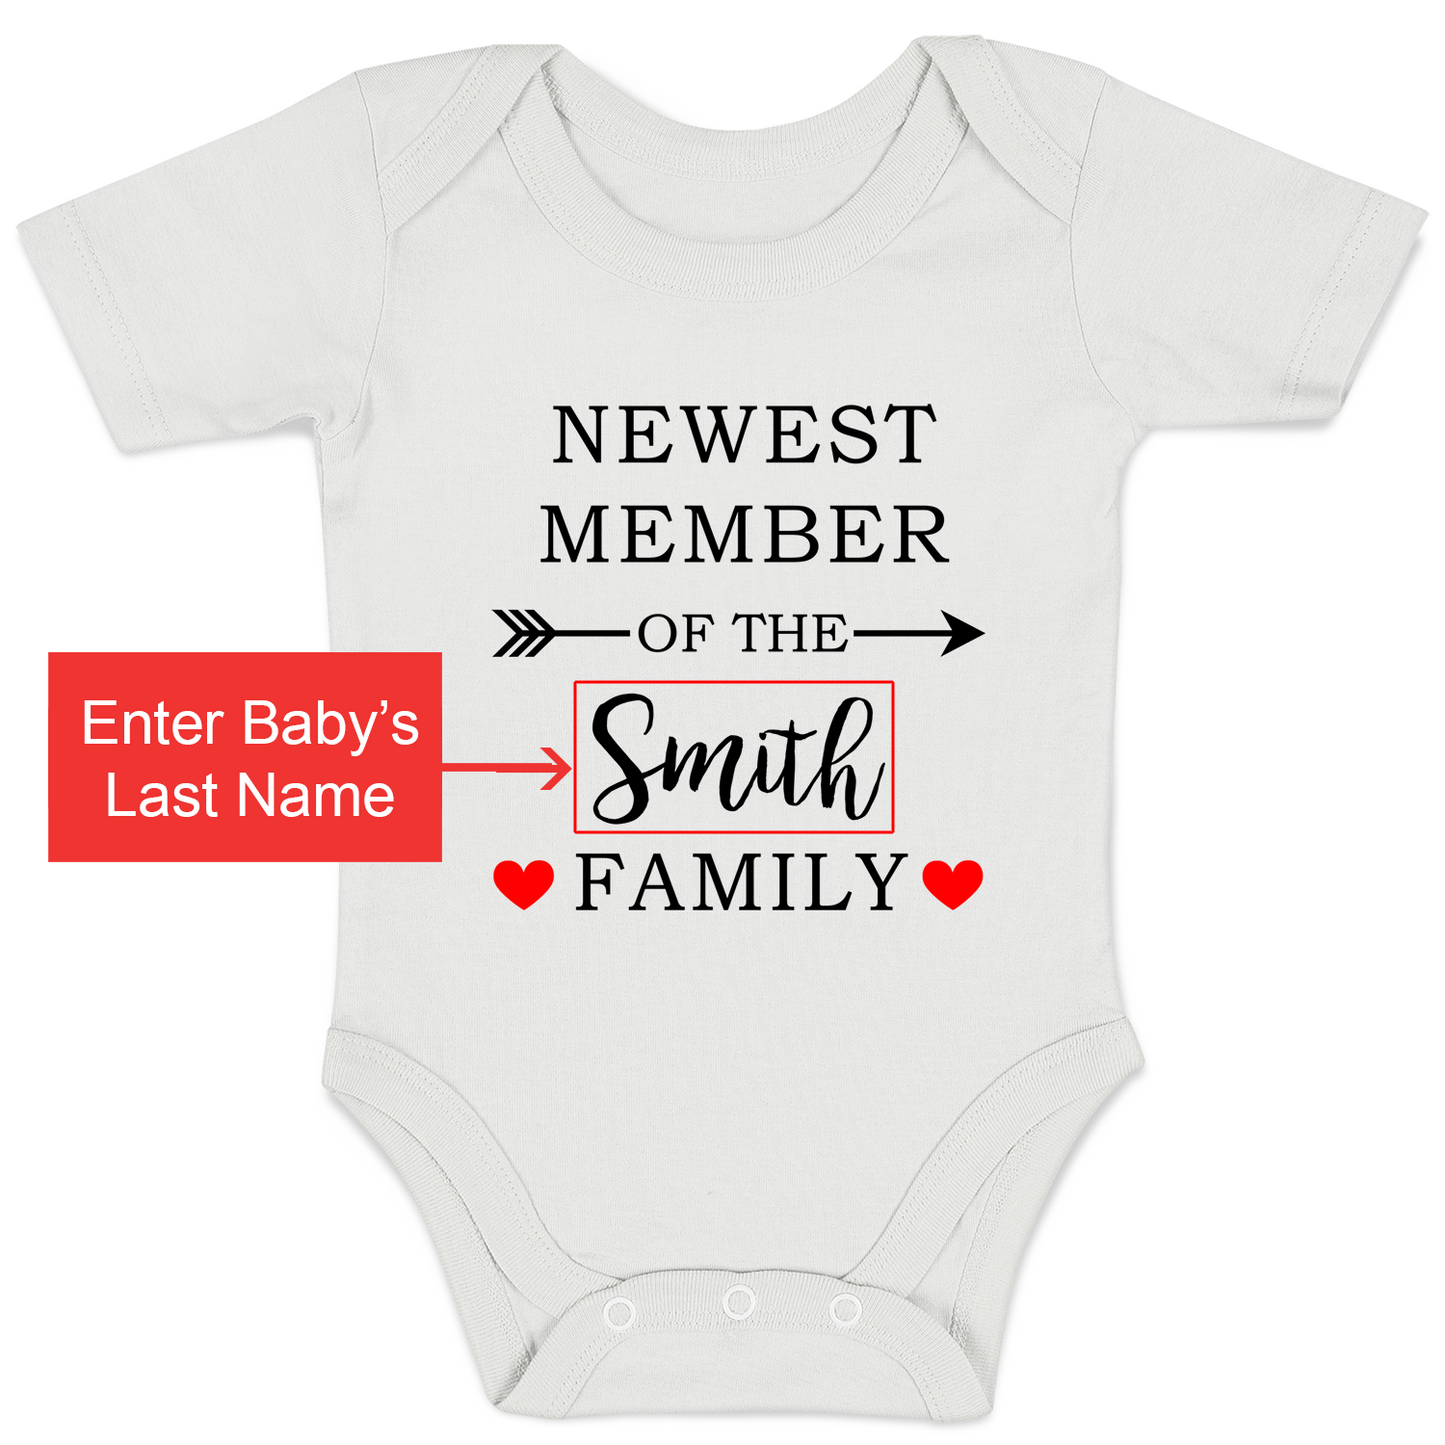 Personalized Organic Baby Bodysuit - Newest Member of the Family (White / Short Sleeve)